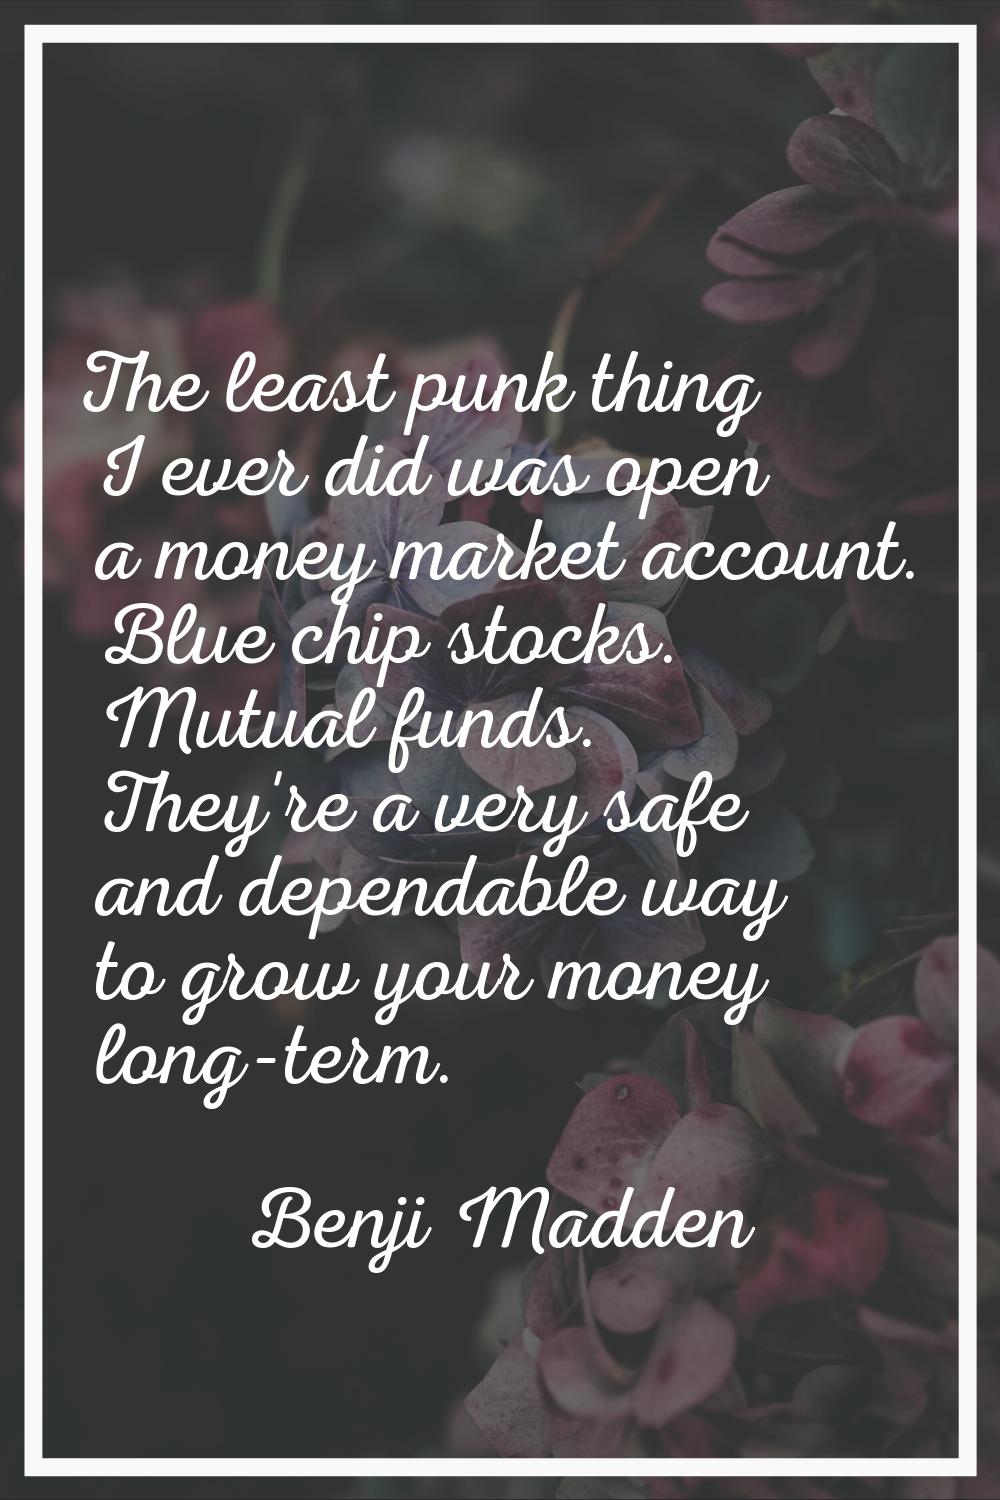 The least punk thing I ever did was open a money market account. Blue chip stocks. Mutual funds. Th